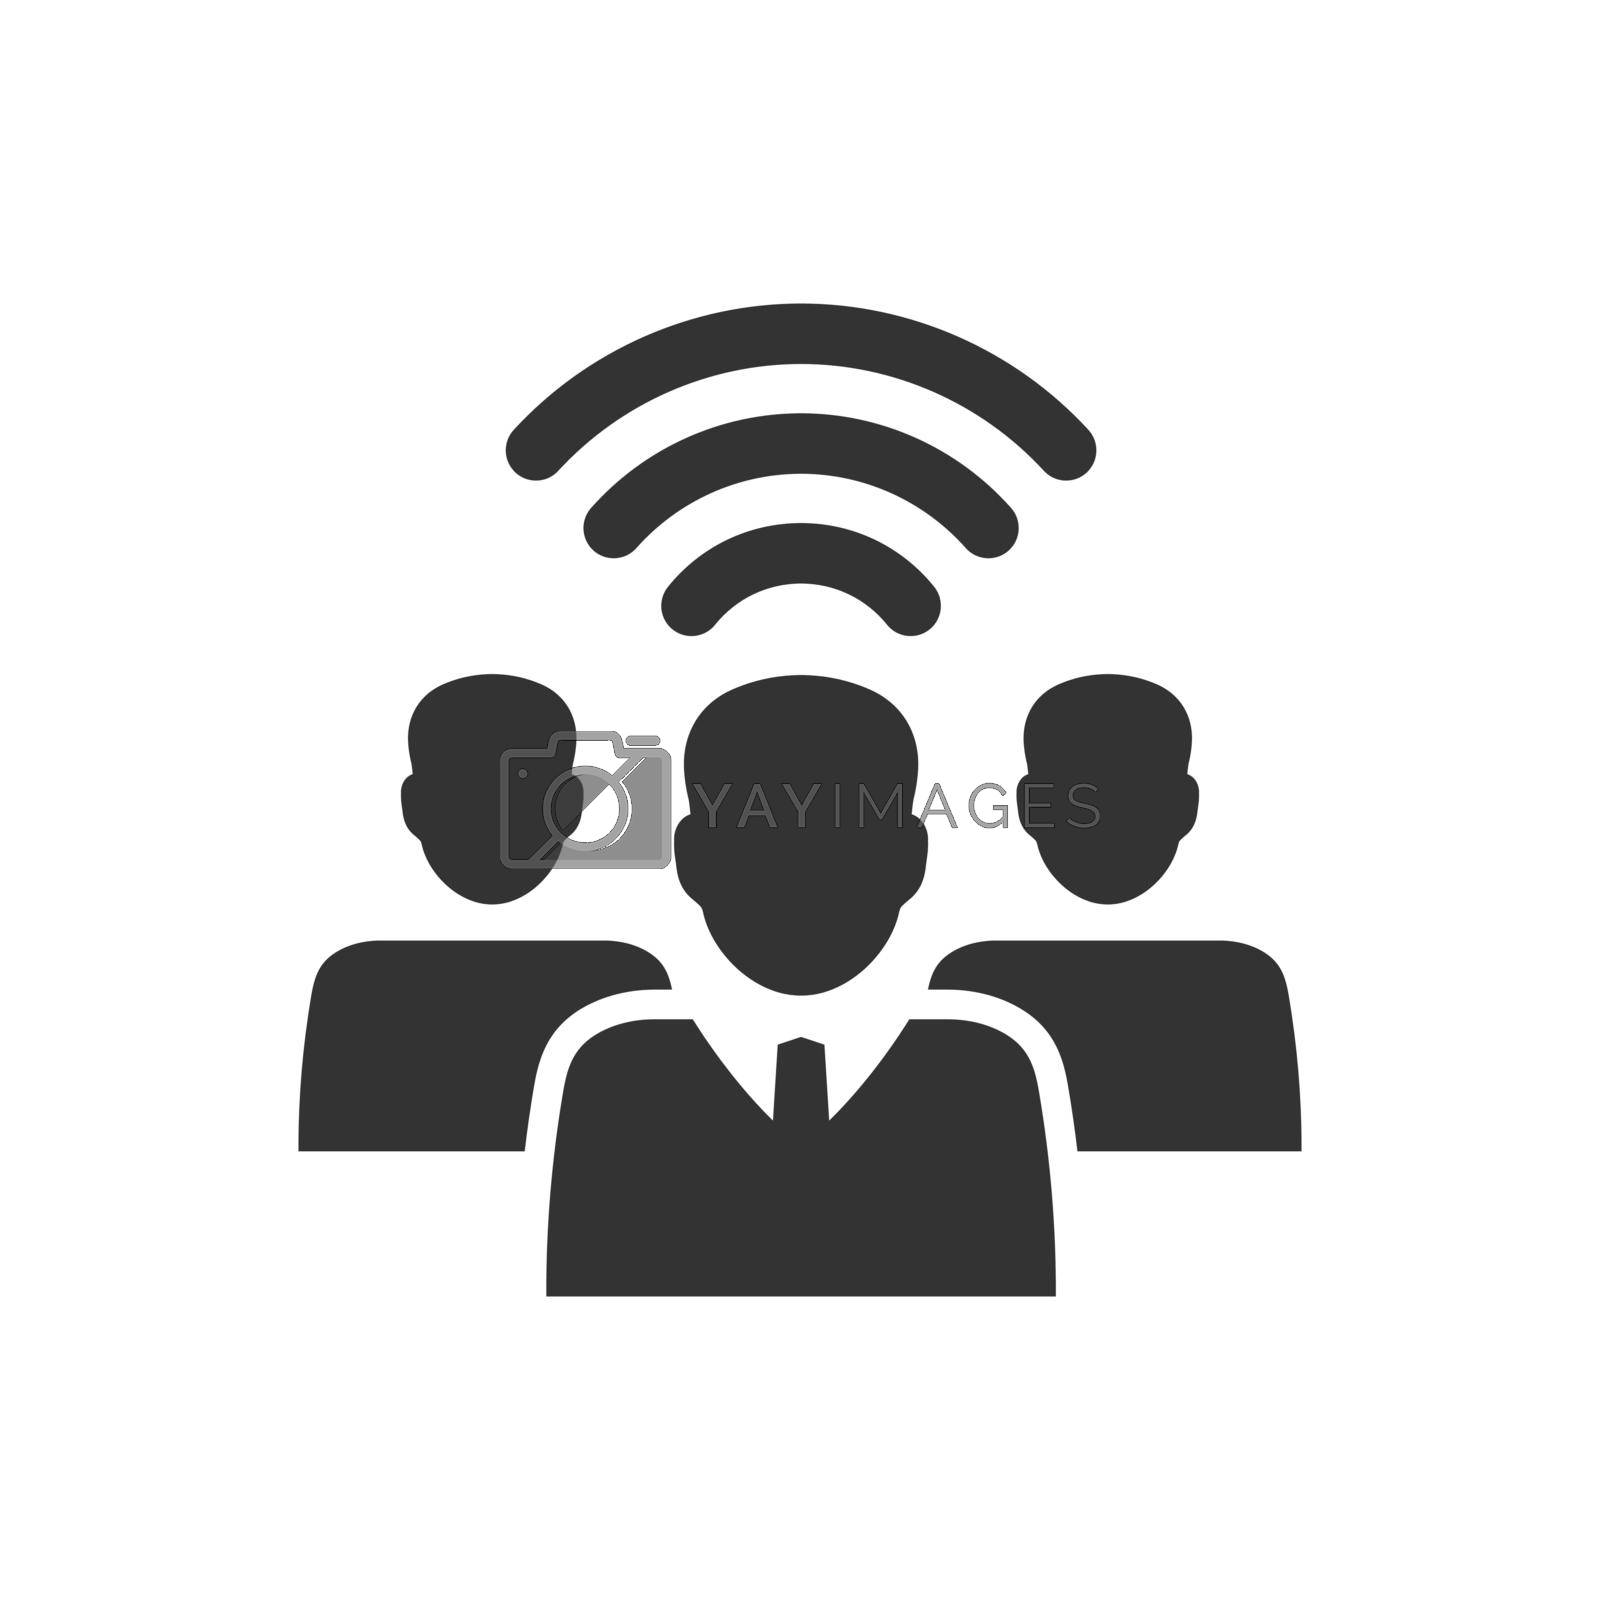 Royalty free image of Team communication icon  by delwar018